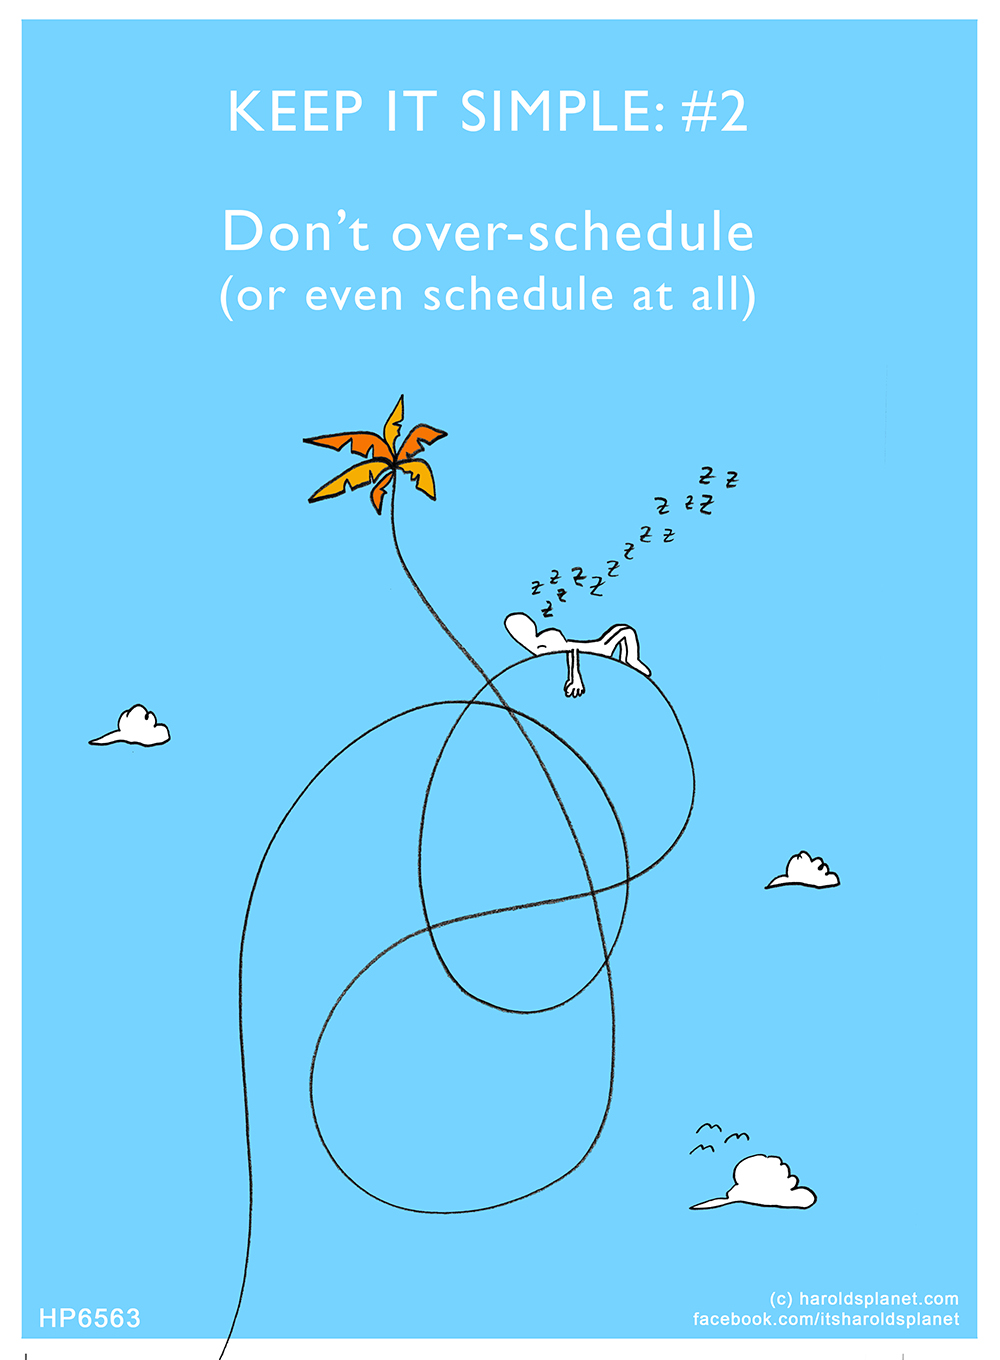 Harold's Planet: KEEP IT SIMPLE: #2 Don’t over-schedule (or even schedule at all)